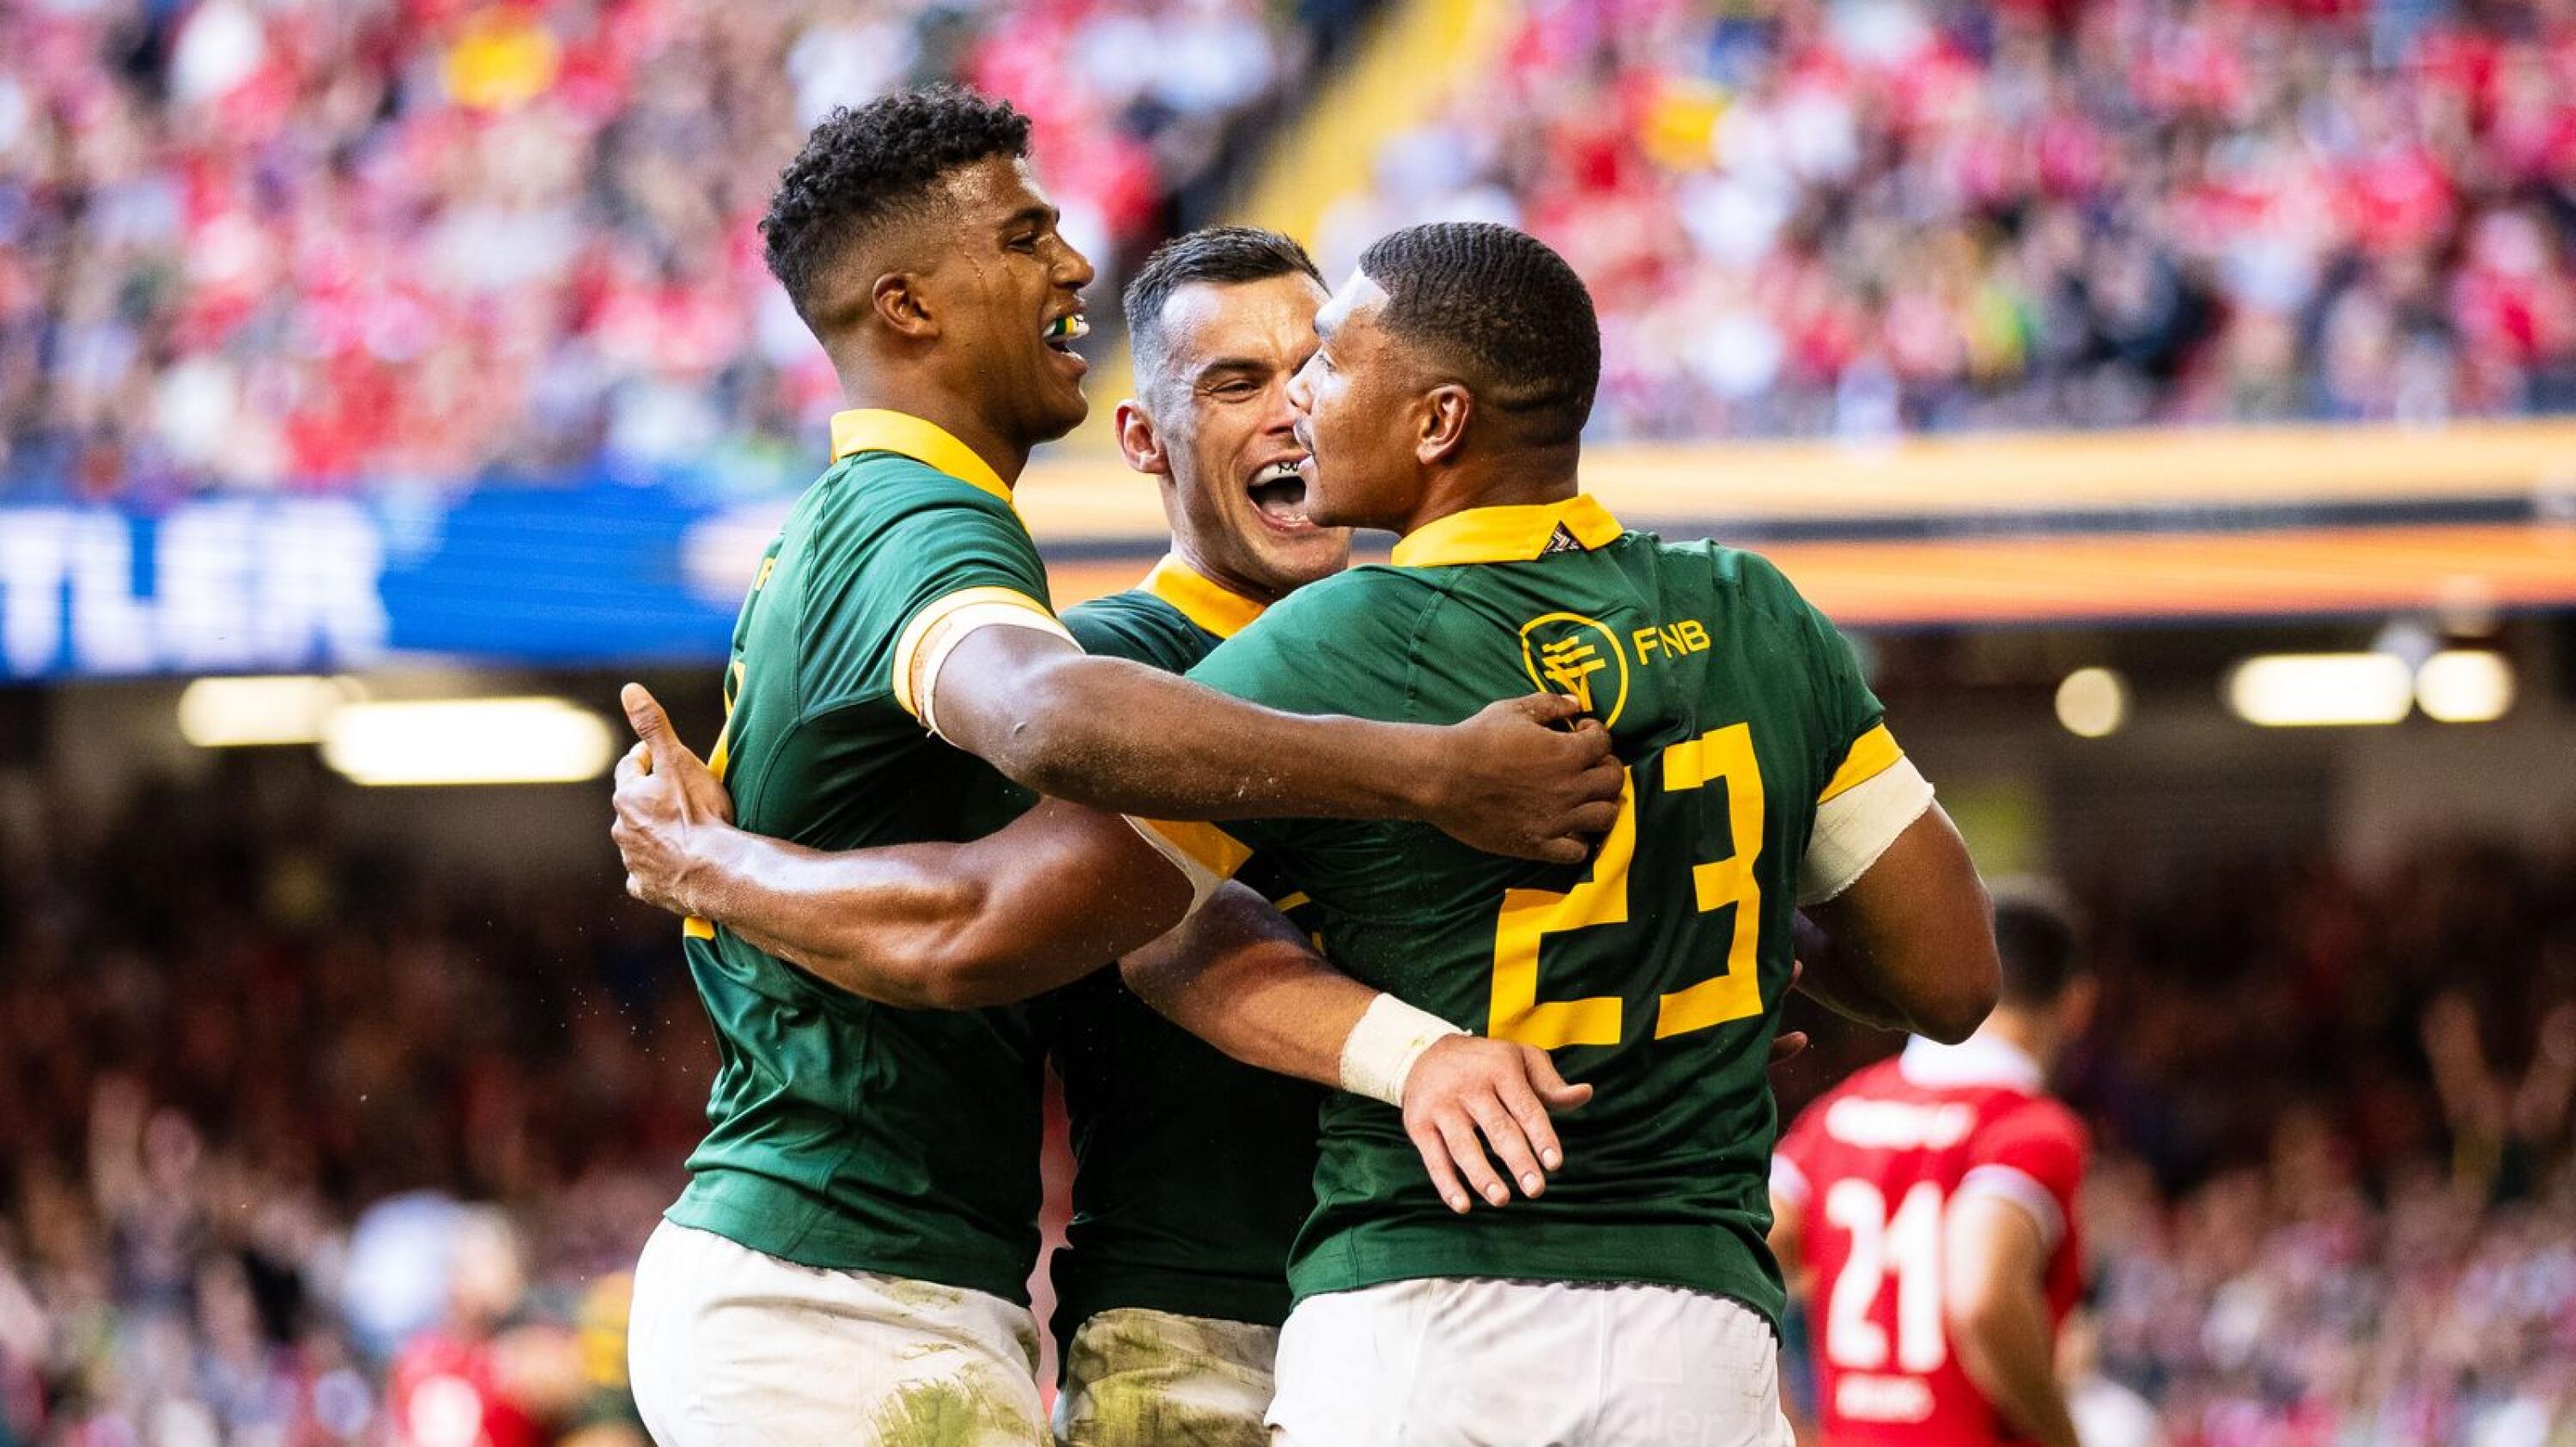 Damian Willemse of South Africa celebrates scoring his sides eighth try with team-mates Jesse Kriel & Canan Moodie during the Test match against Wales on 19 August 2023 at Principality Stadium in Cardiff, Wales